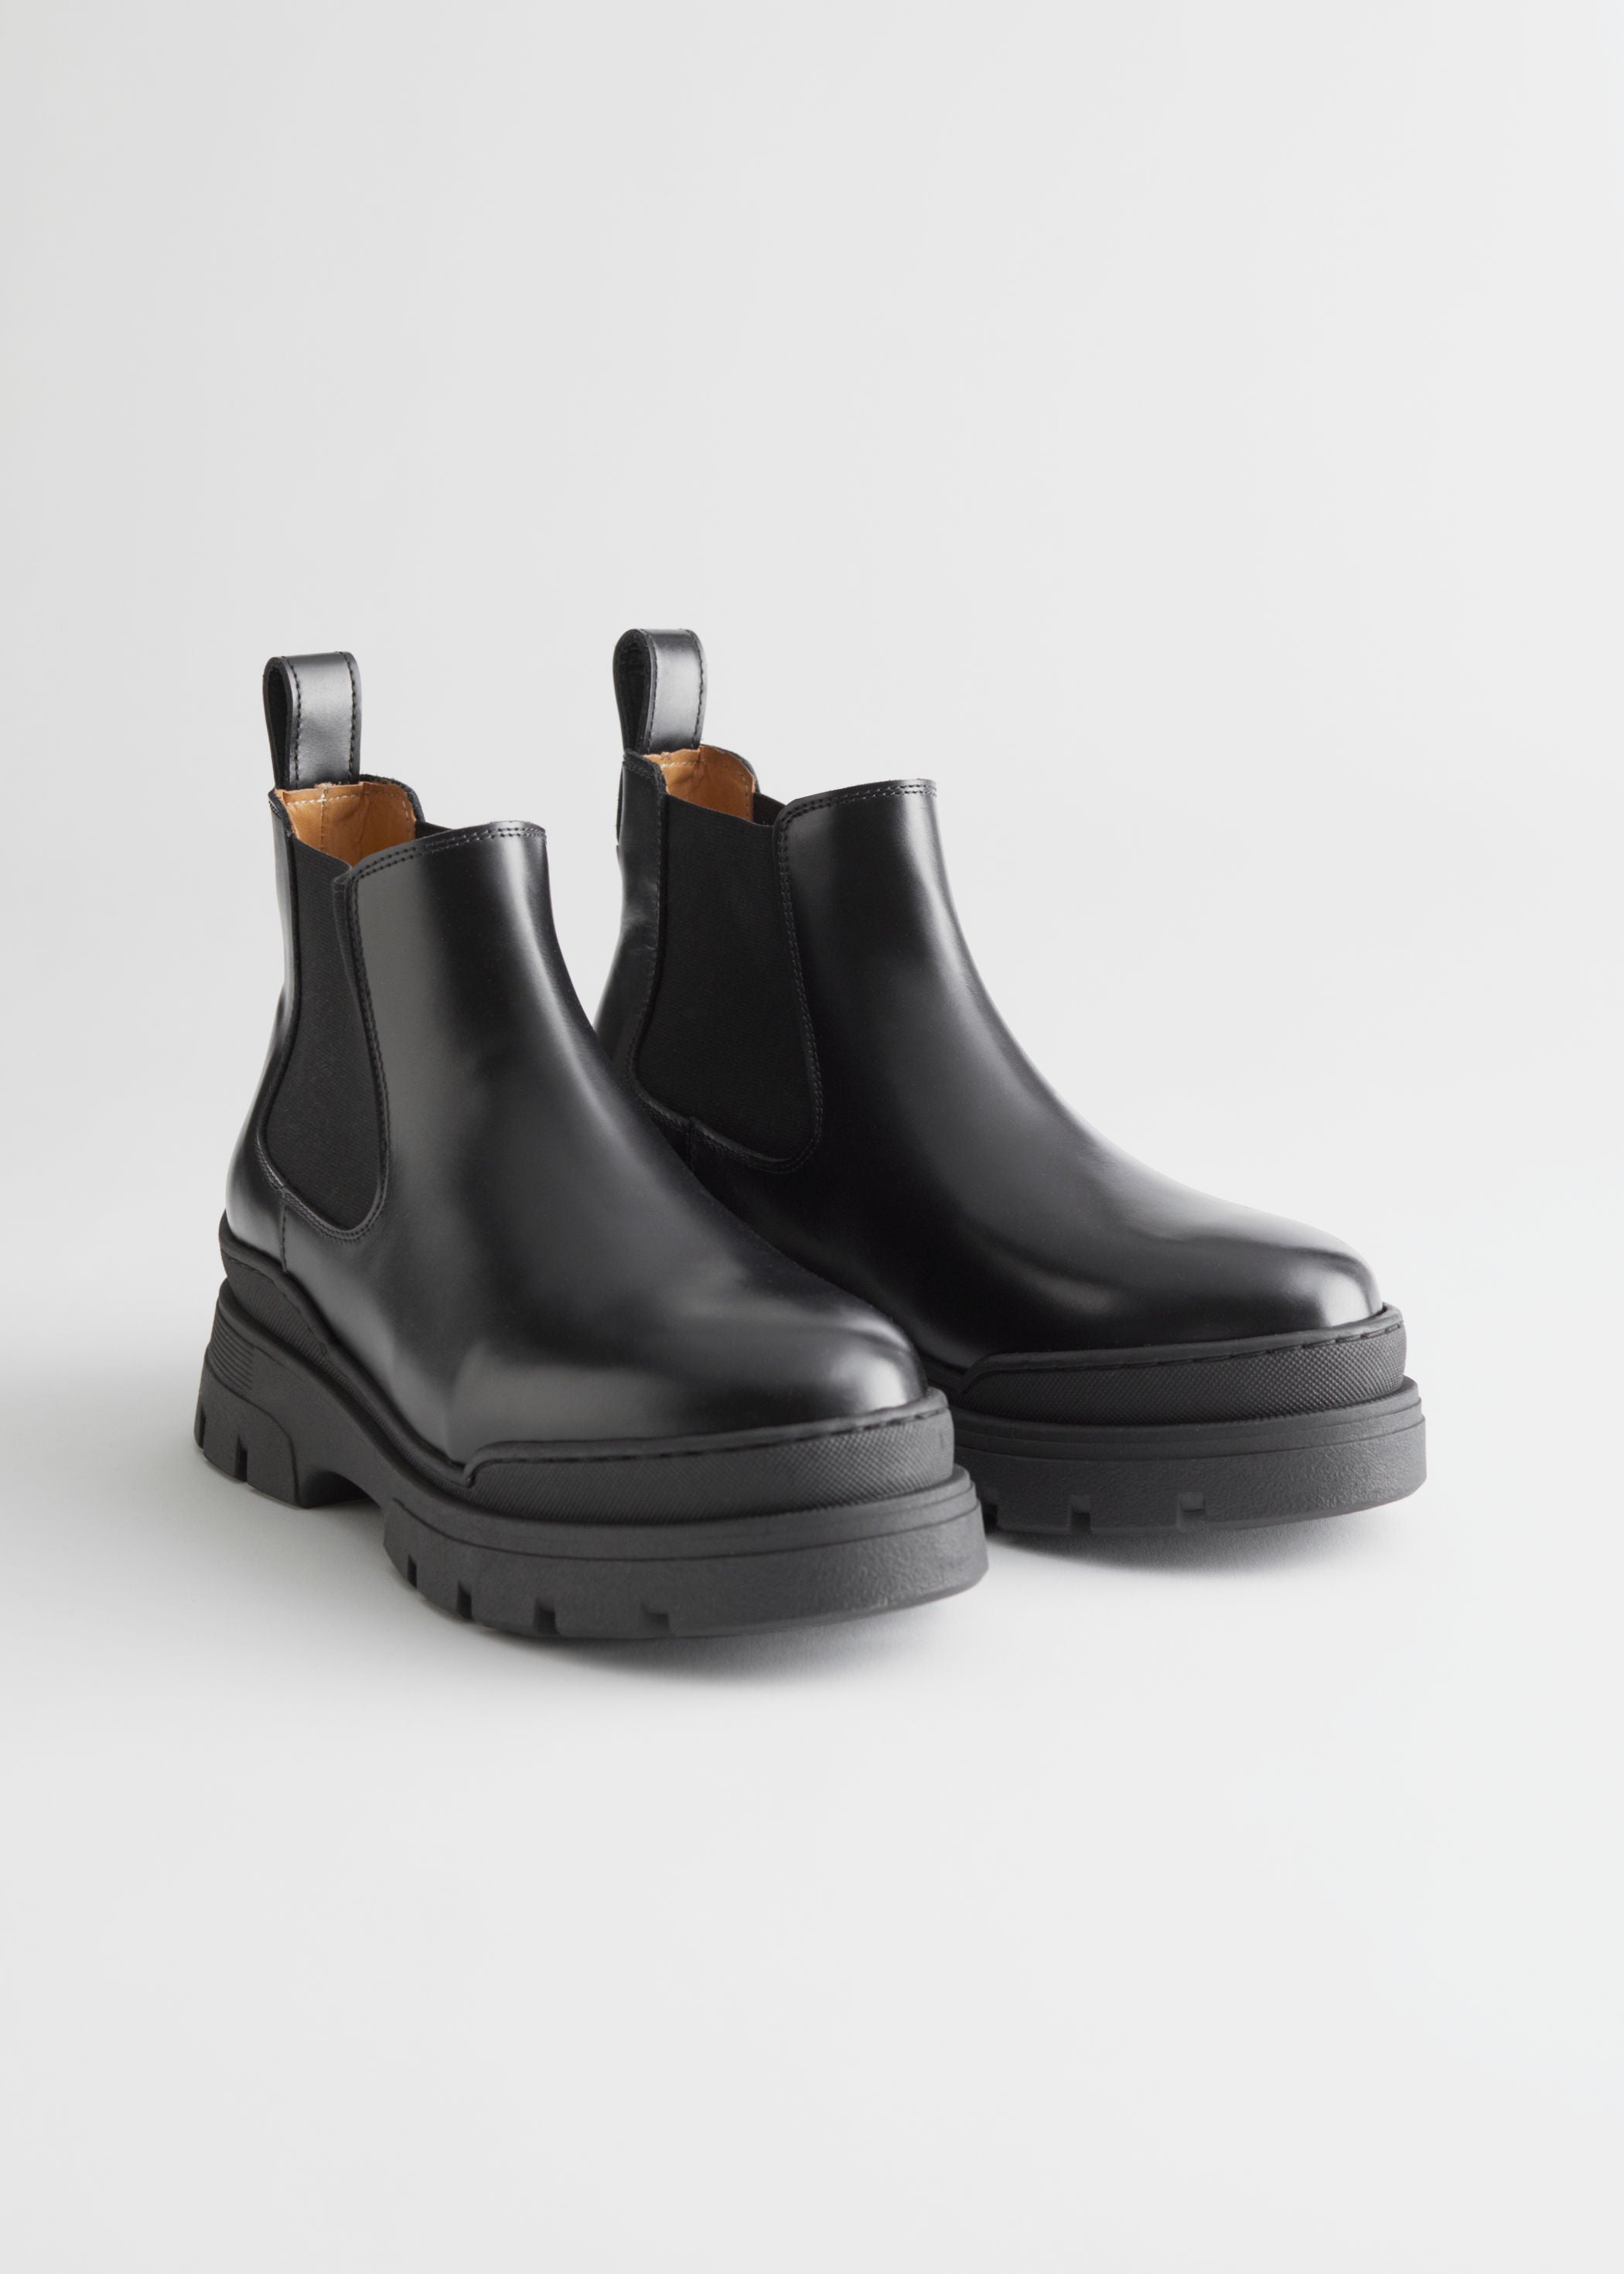 & other stories leather chelsea boots